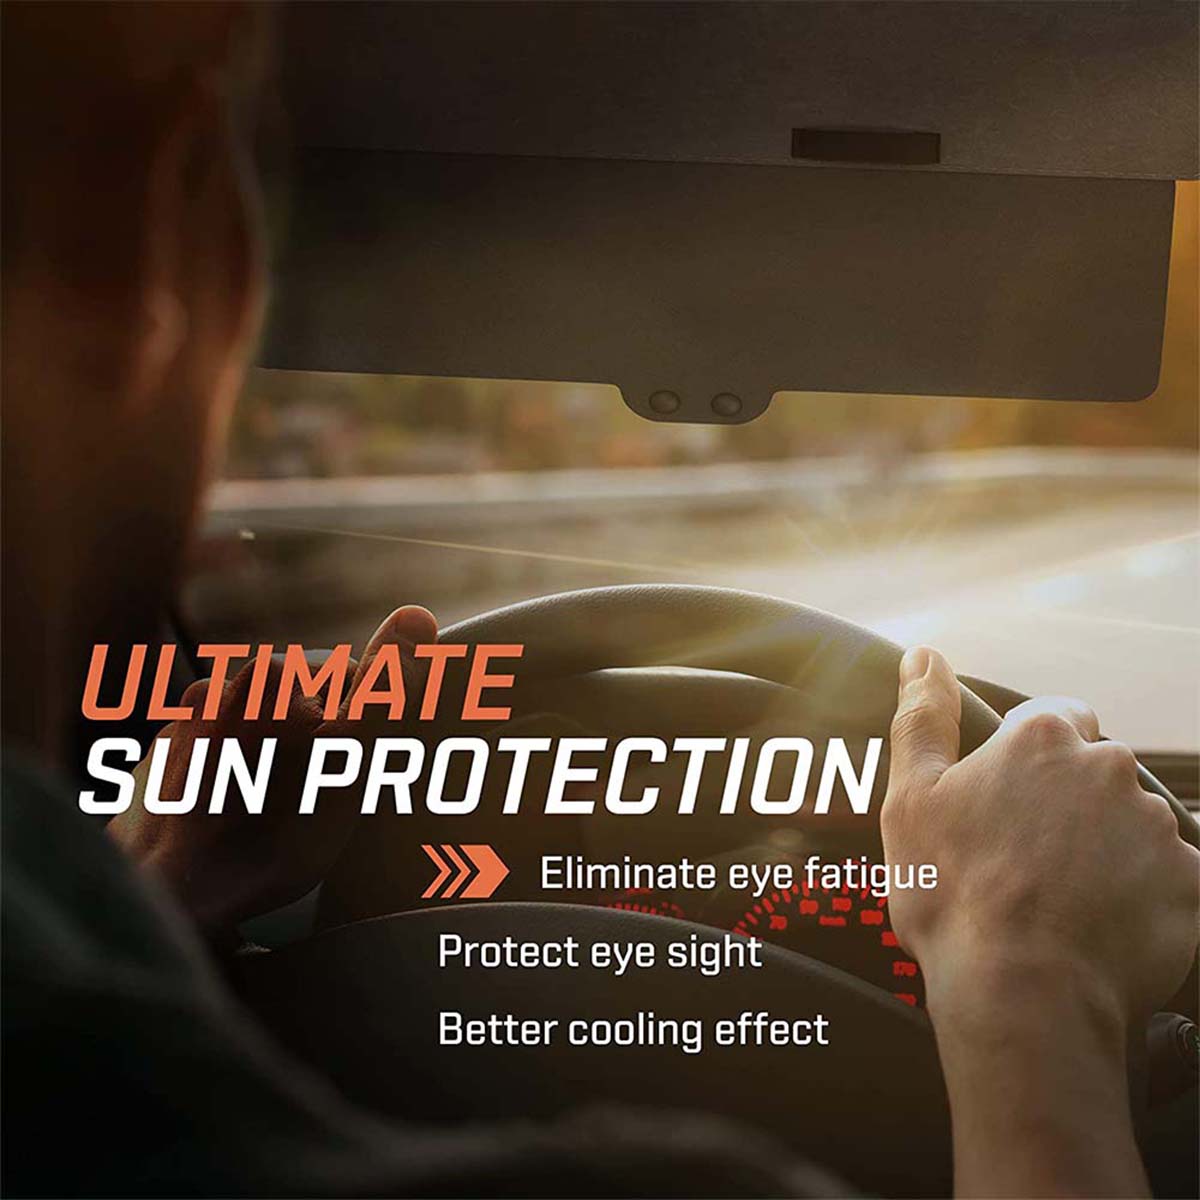 Delicate Leather Polarized Sun Visor Sunshade Extender for Car with Polycarbonate Lens, Custom For Your Cars, Anti-Glare Car Sun Visor Protects from Sun Glare, Snow Blindness, UV Rays, Universal for Cars, SUVs JG13999 - Delicate Leather